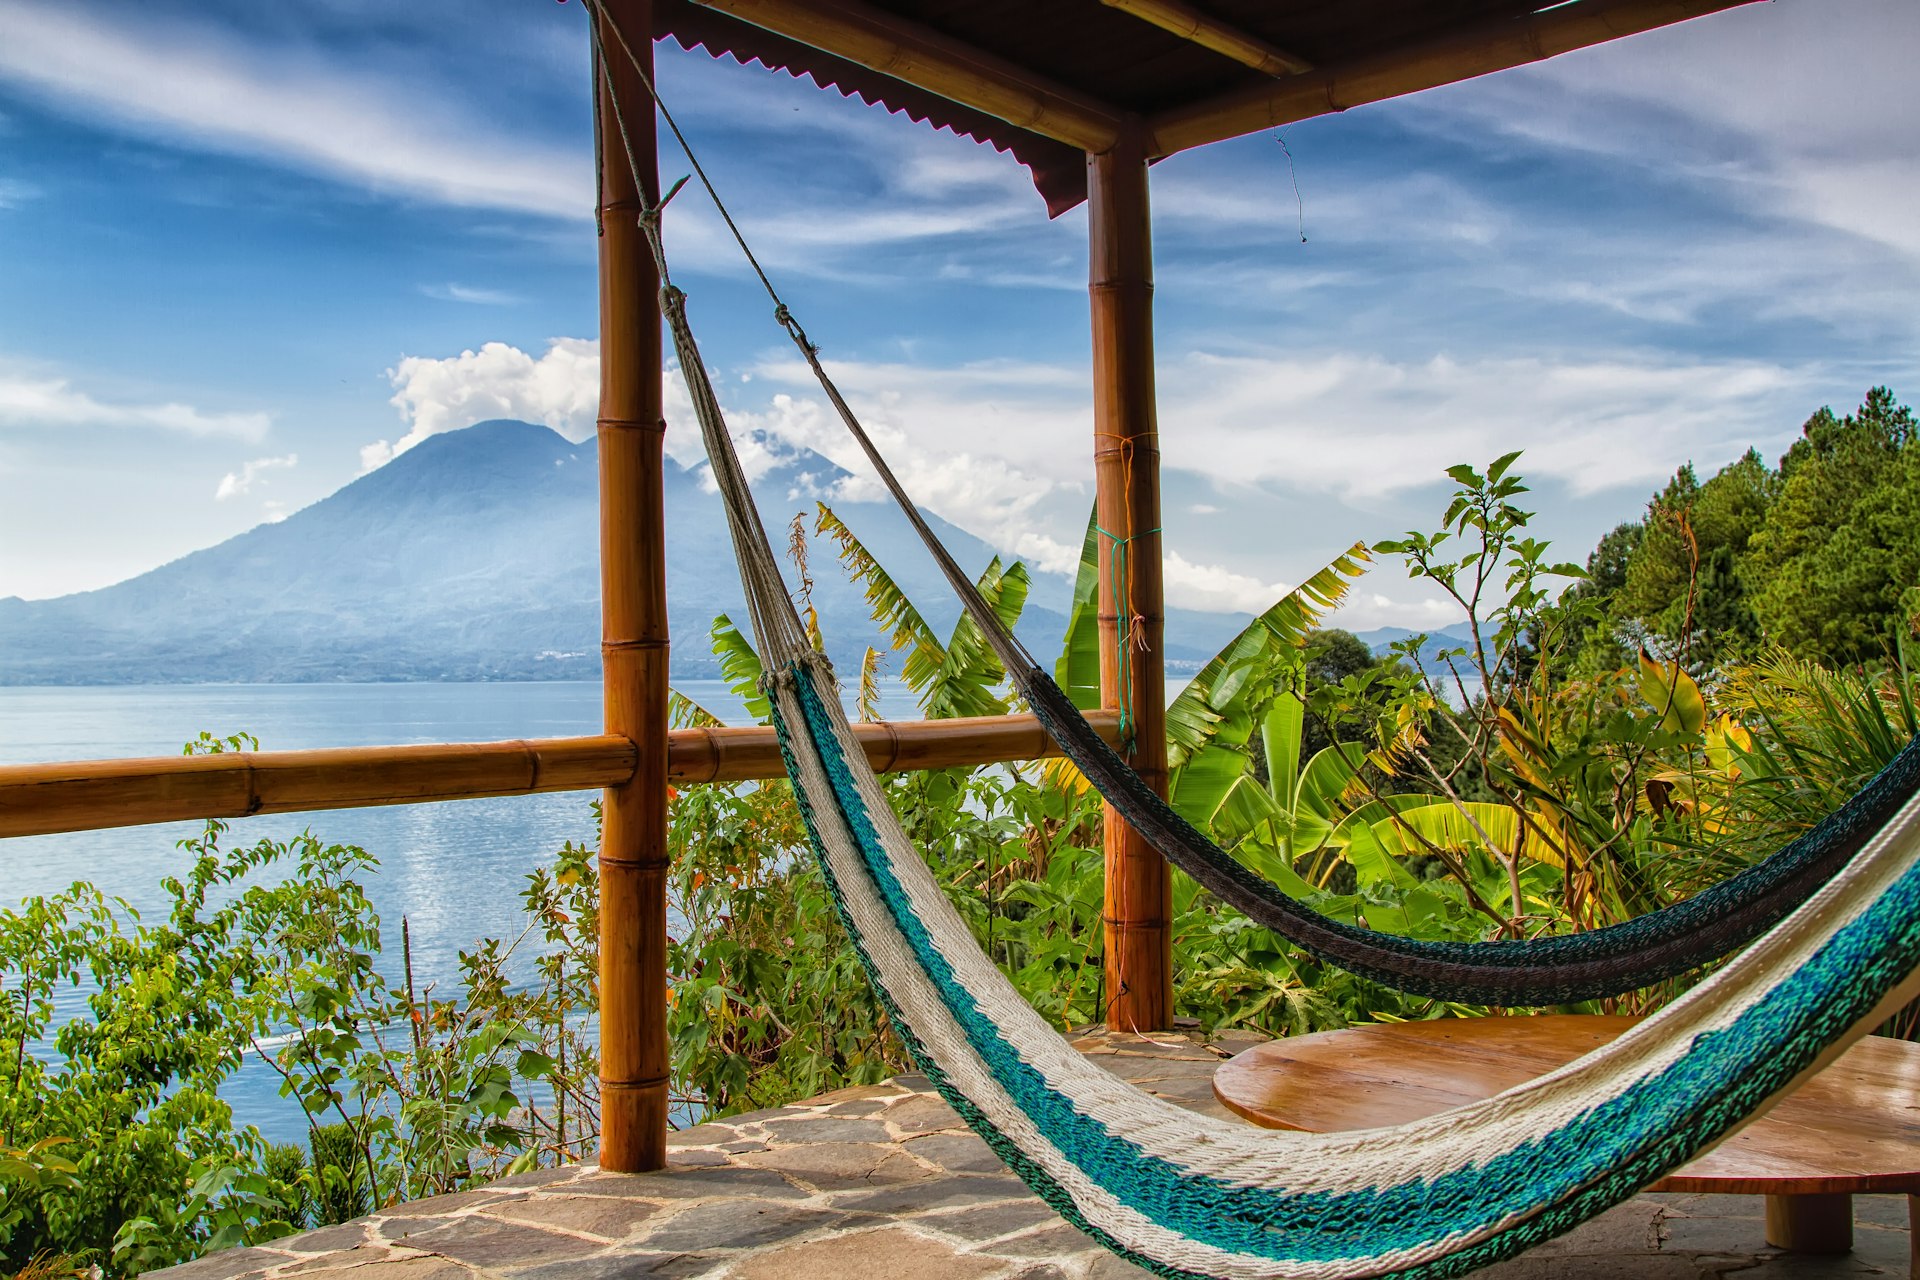 Two hammocks strung up on a cabin balcony overlooking a lake and volcano in Guatemala